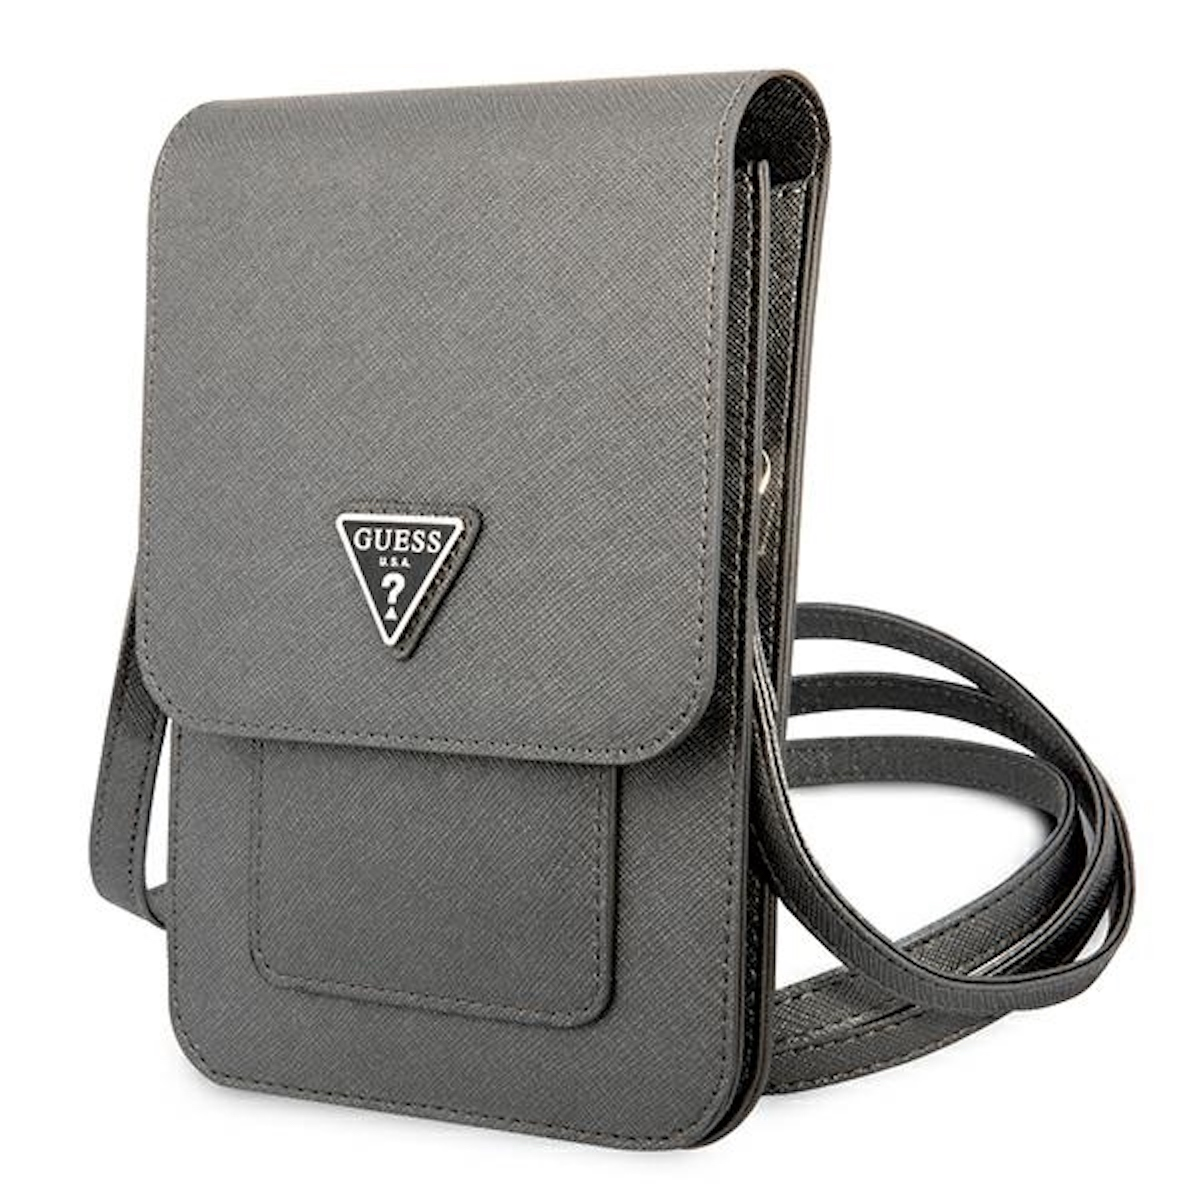 Cover, Triangle Universelle Full Universell, Grau Umhängetasche, Saffiano Tasche, GUESS